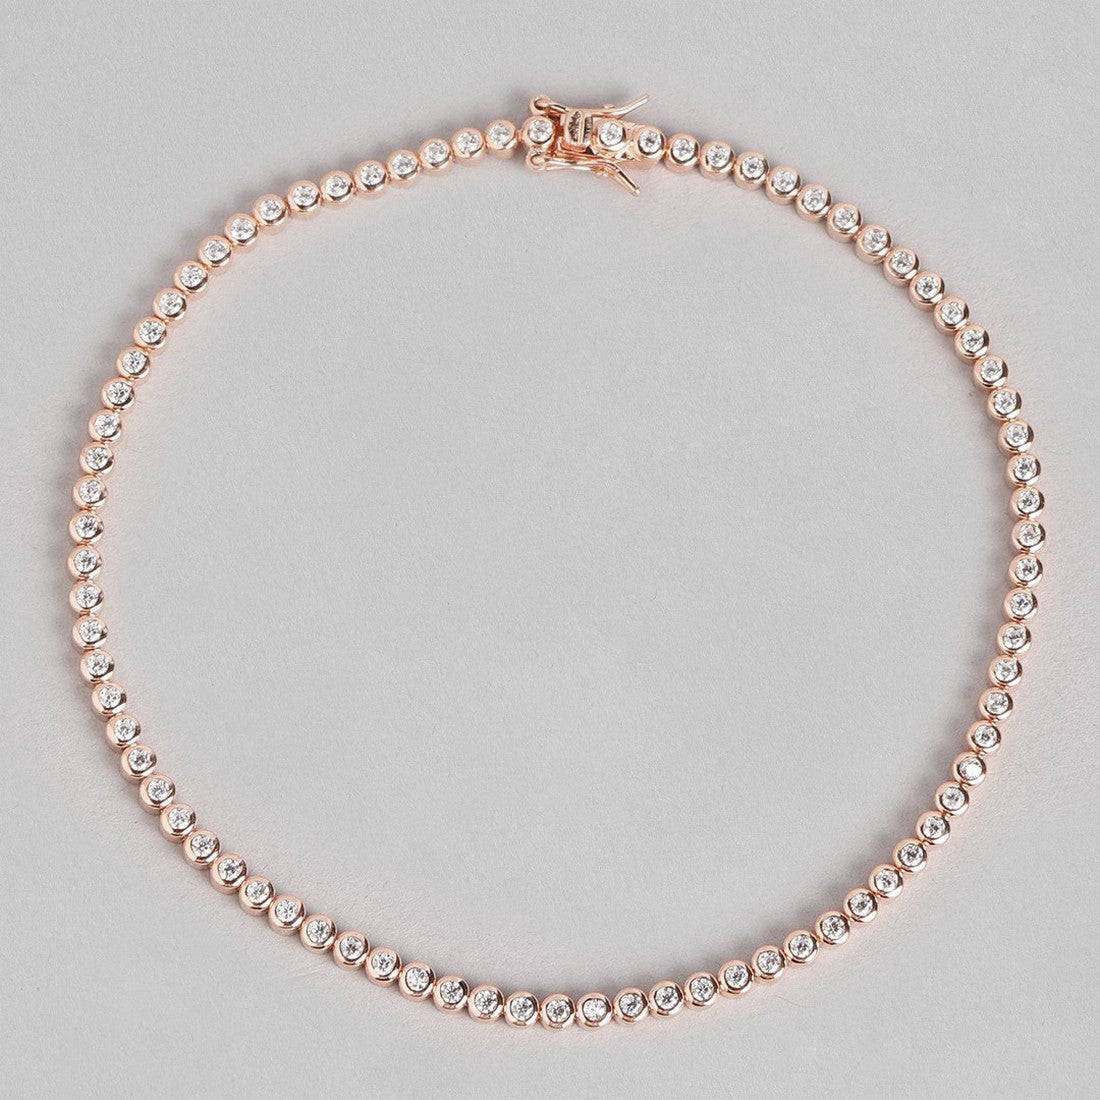 Single Solitaire Line 925 Sterling Silver Anklet